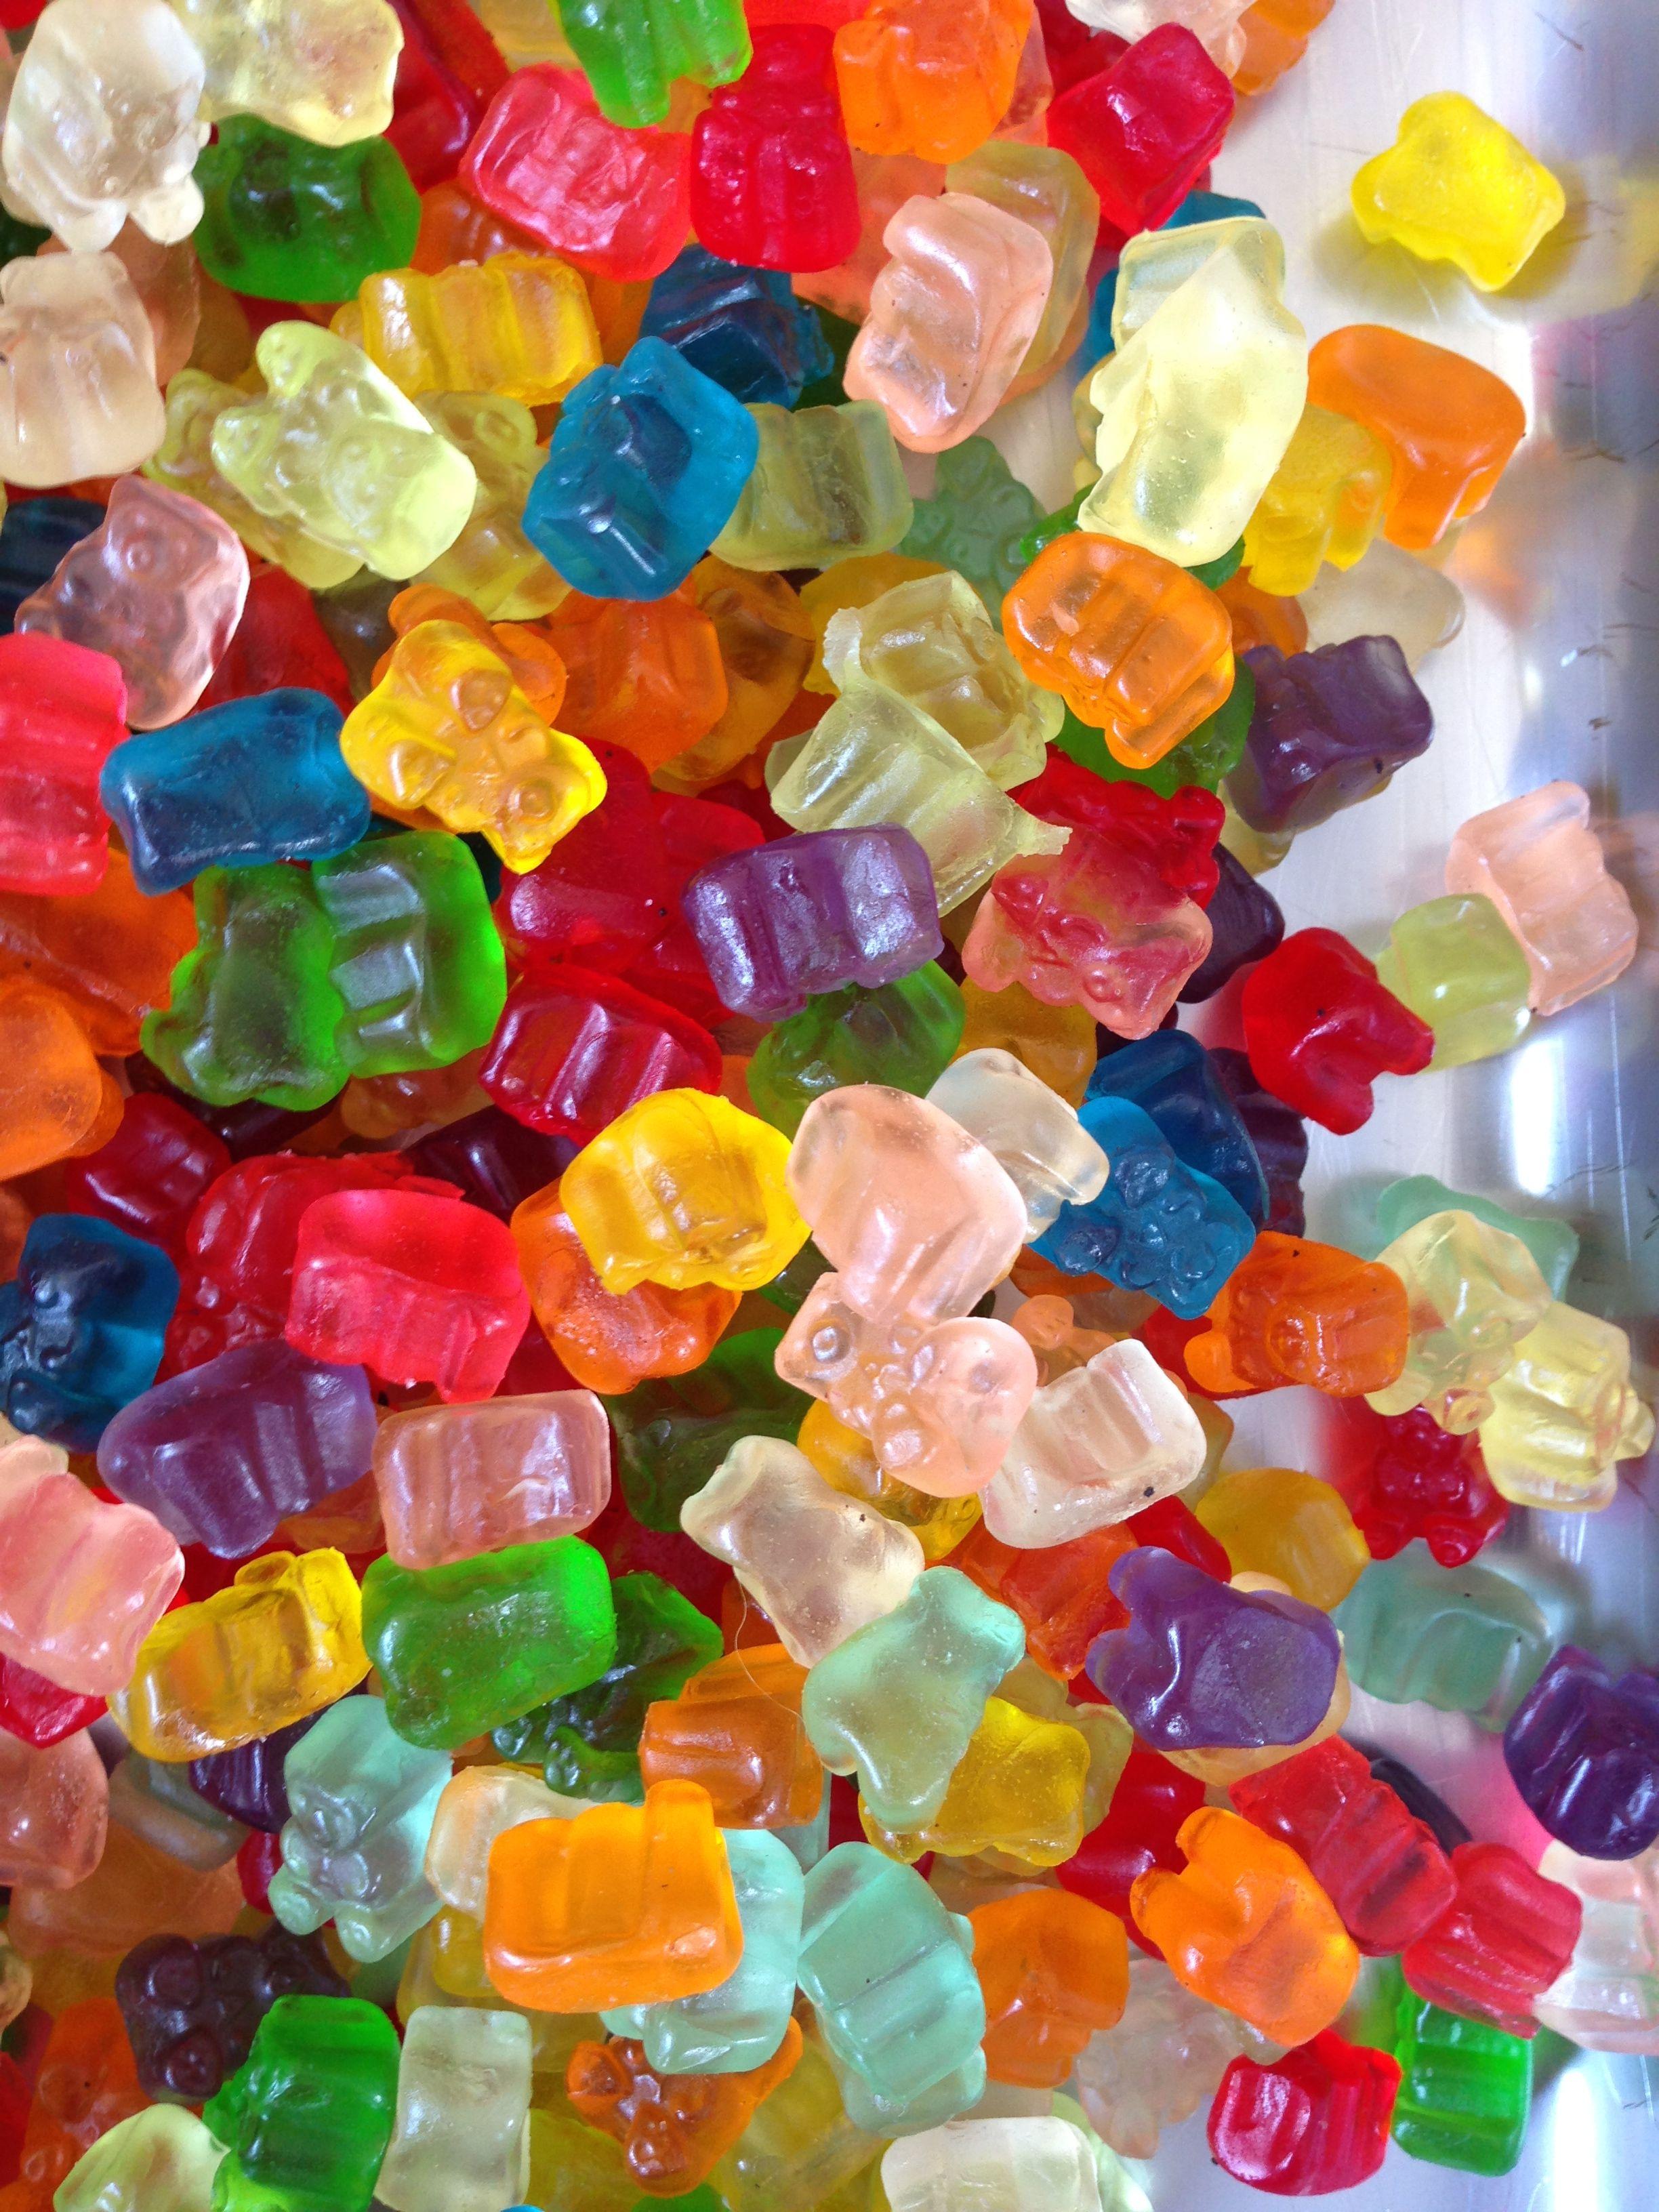 Gummy bears!. Candy photography, Colorful candy